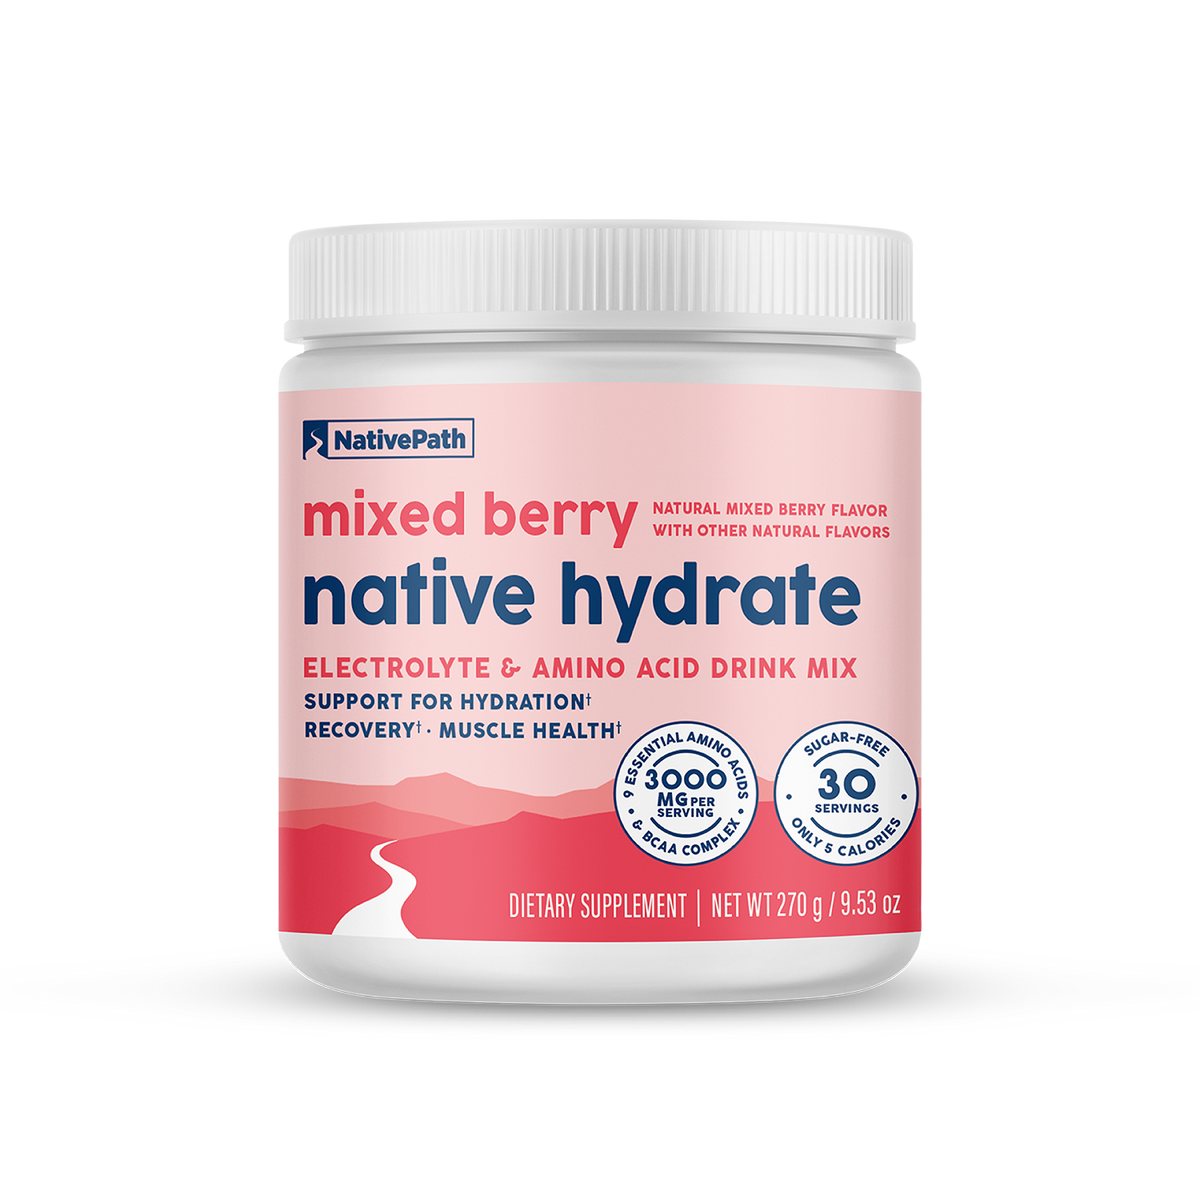 Mixed Berry Native Hydrate